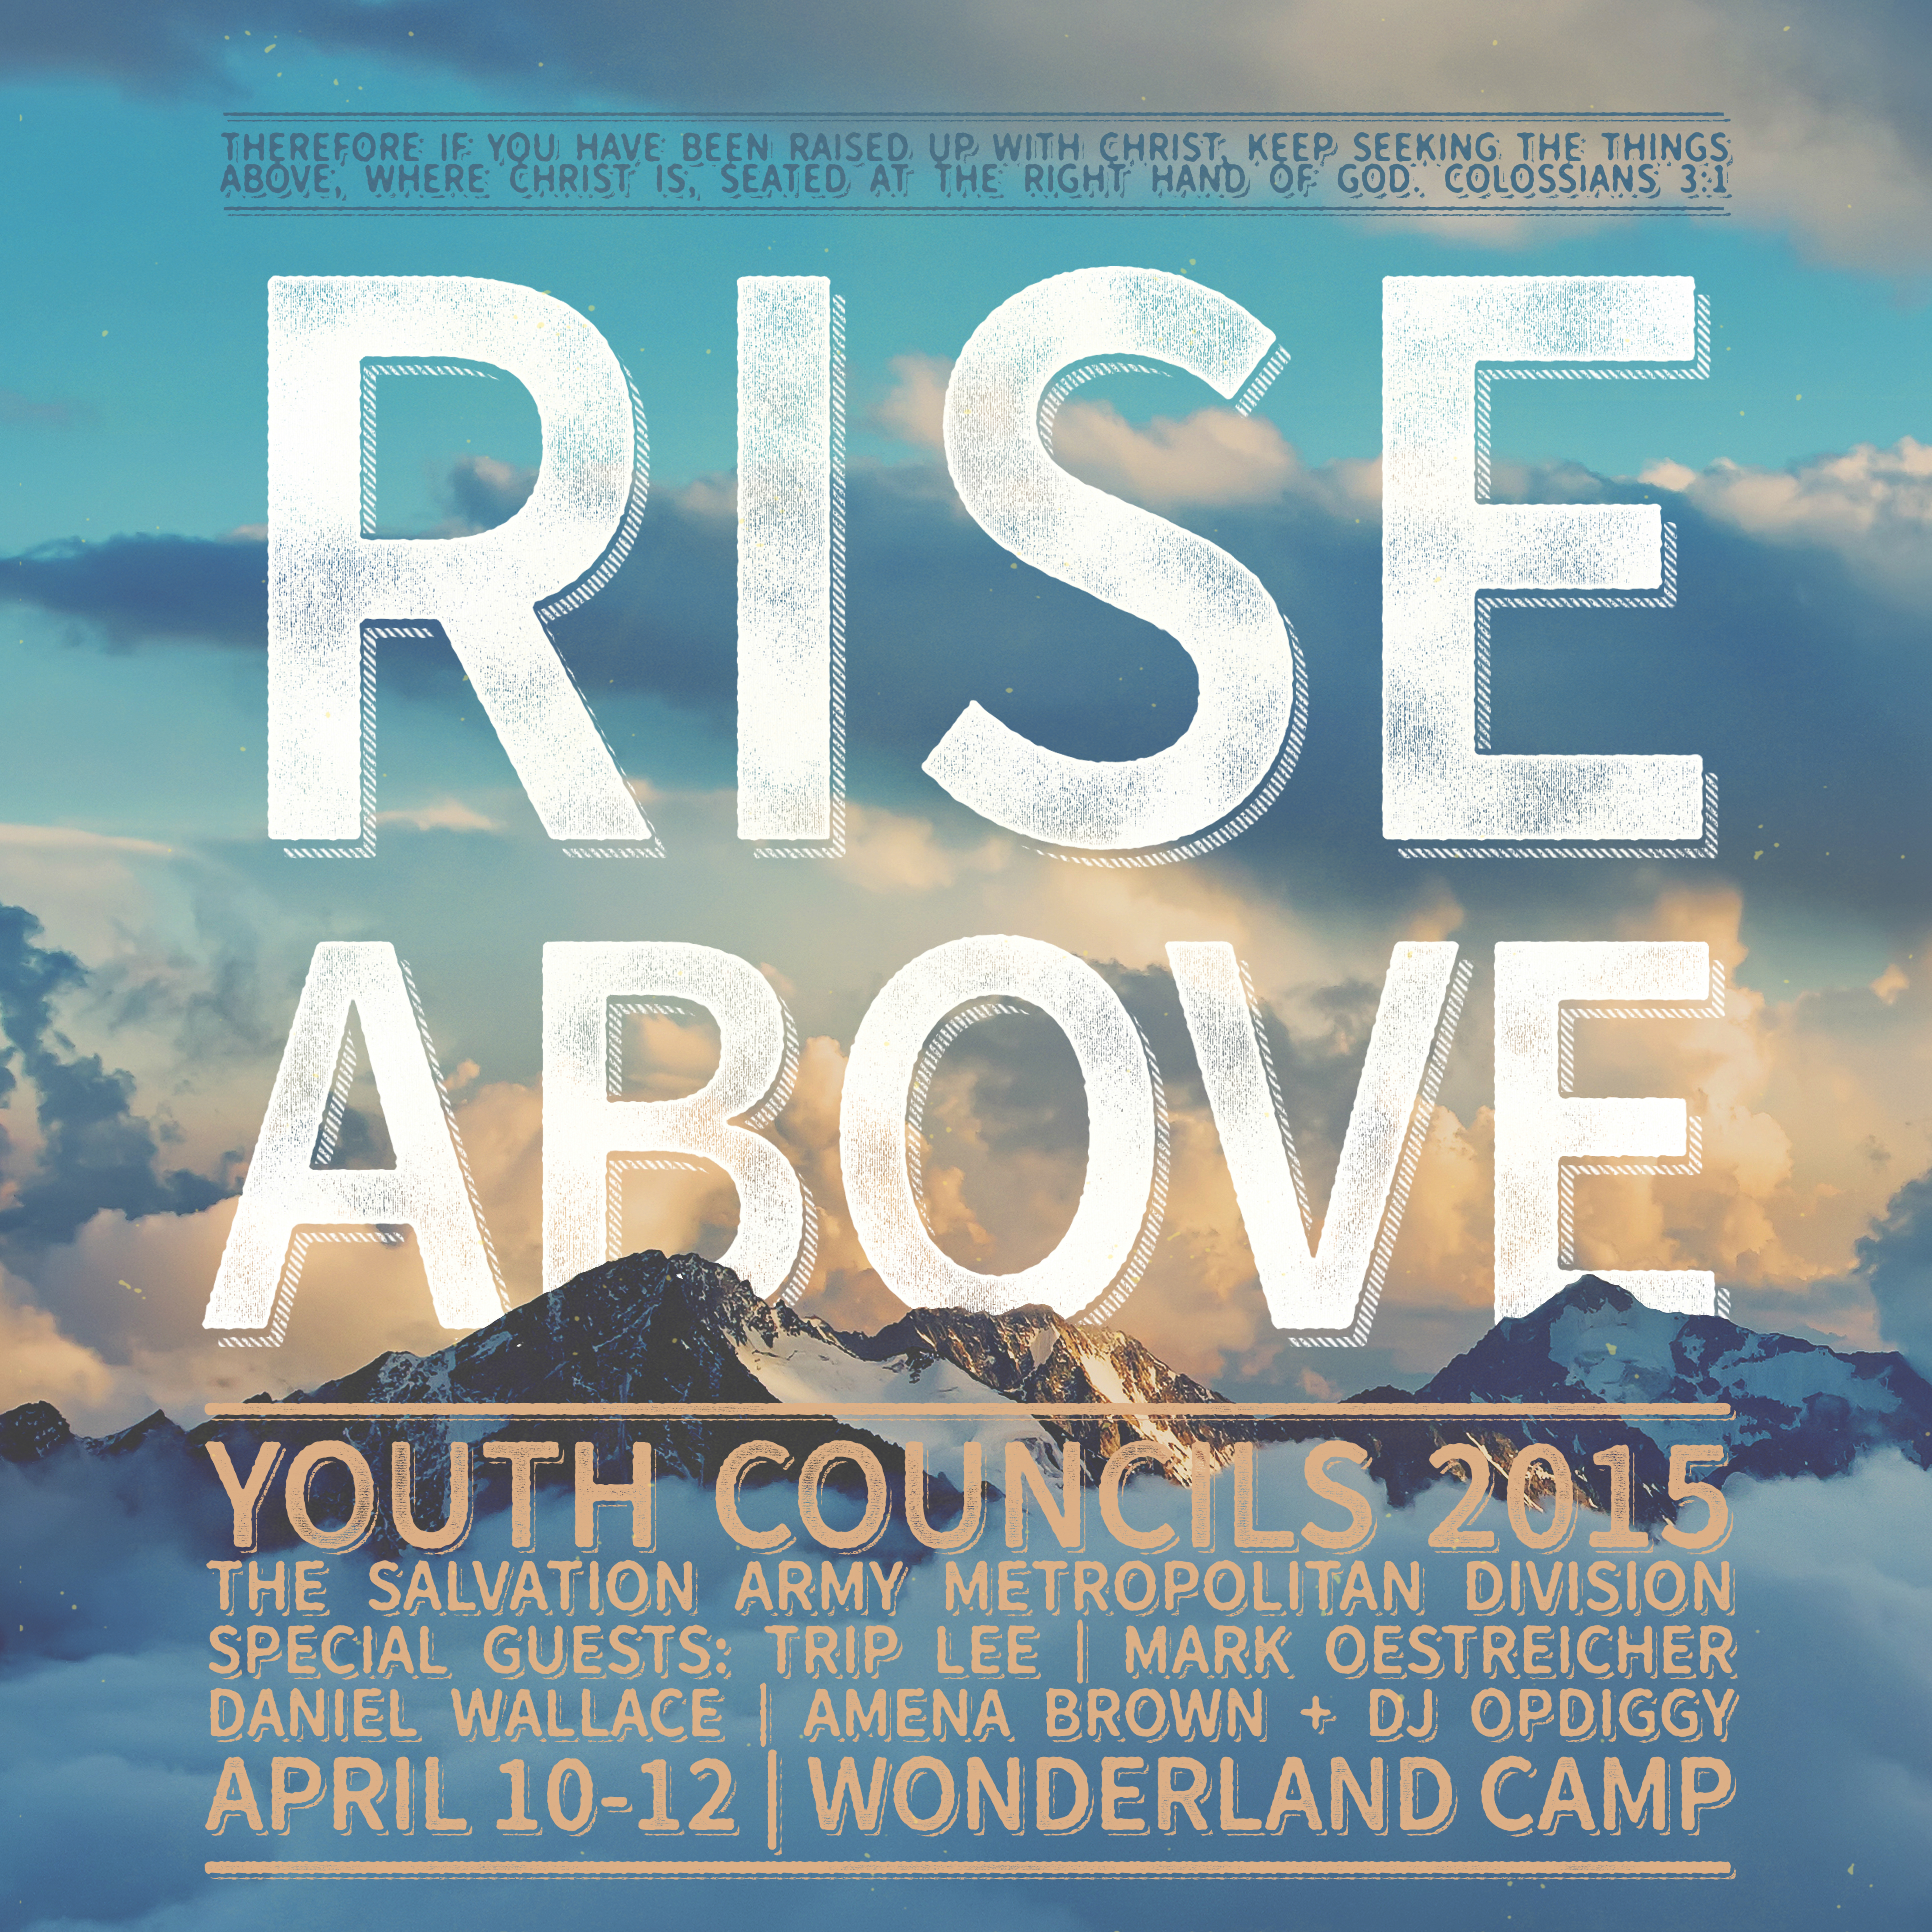 Youth Councils 2015 Poster - Final Draft (20 x 20)